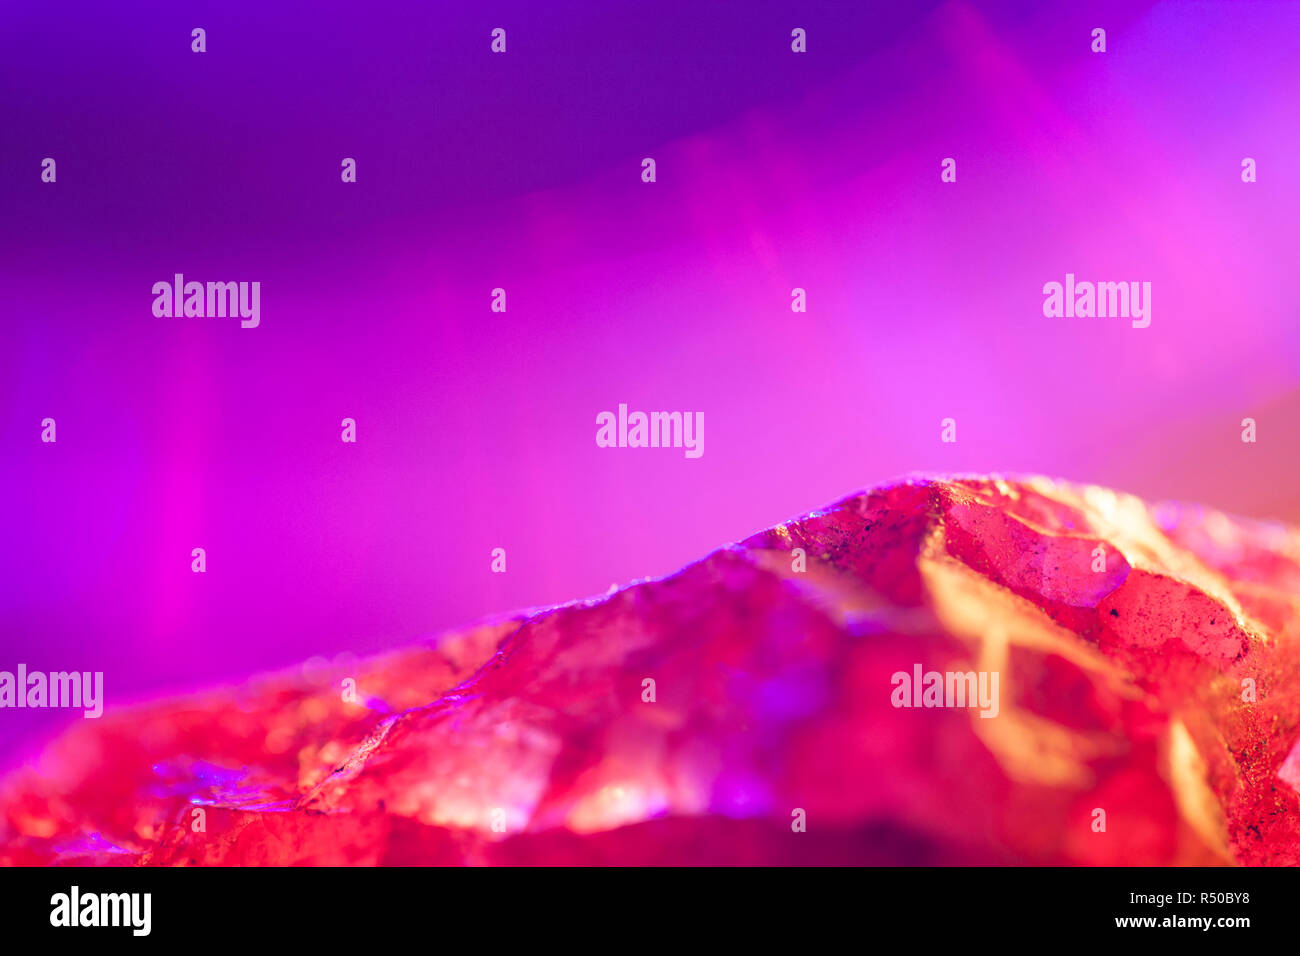 Pink Quartz crystal specimen shot using beautiful colourful lighting.Pink Gemstone.With copy space. Stock Photo